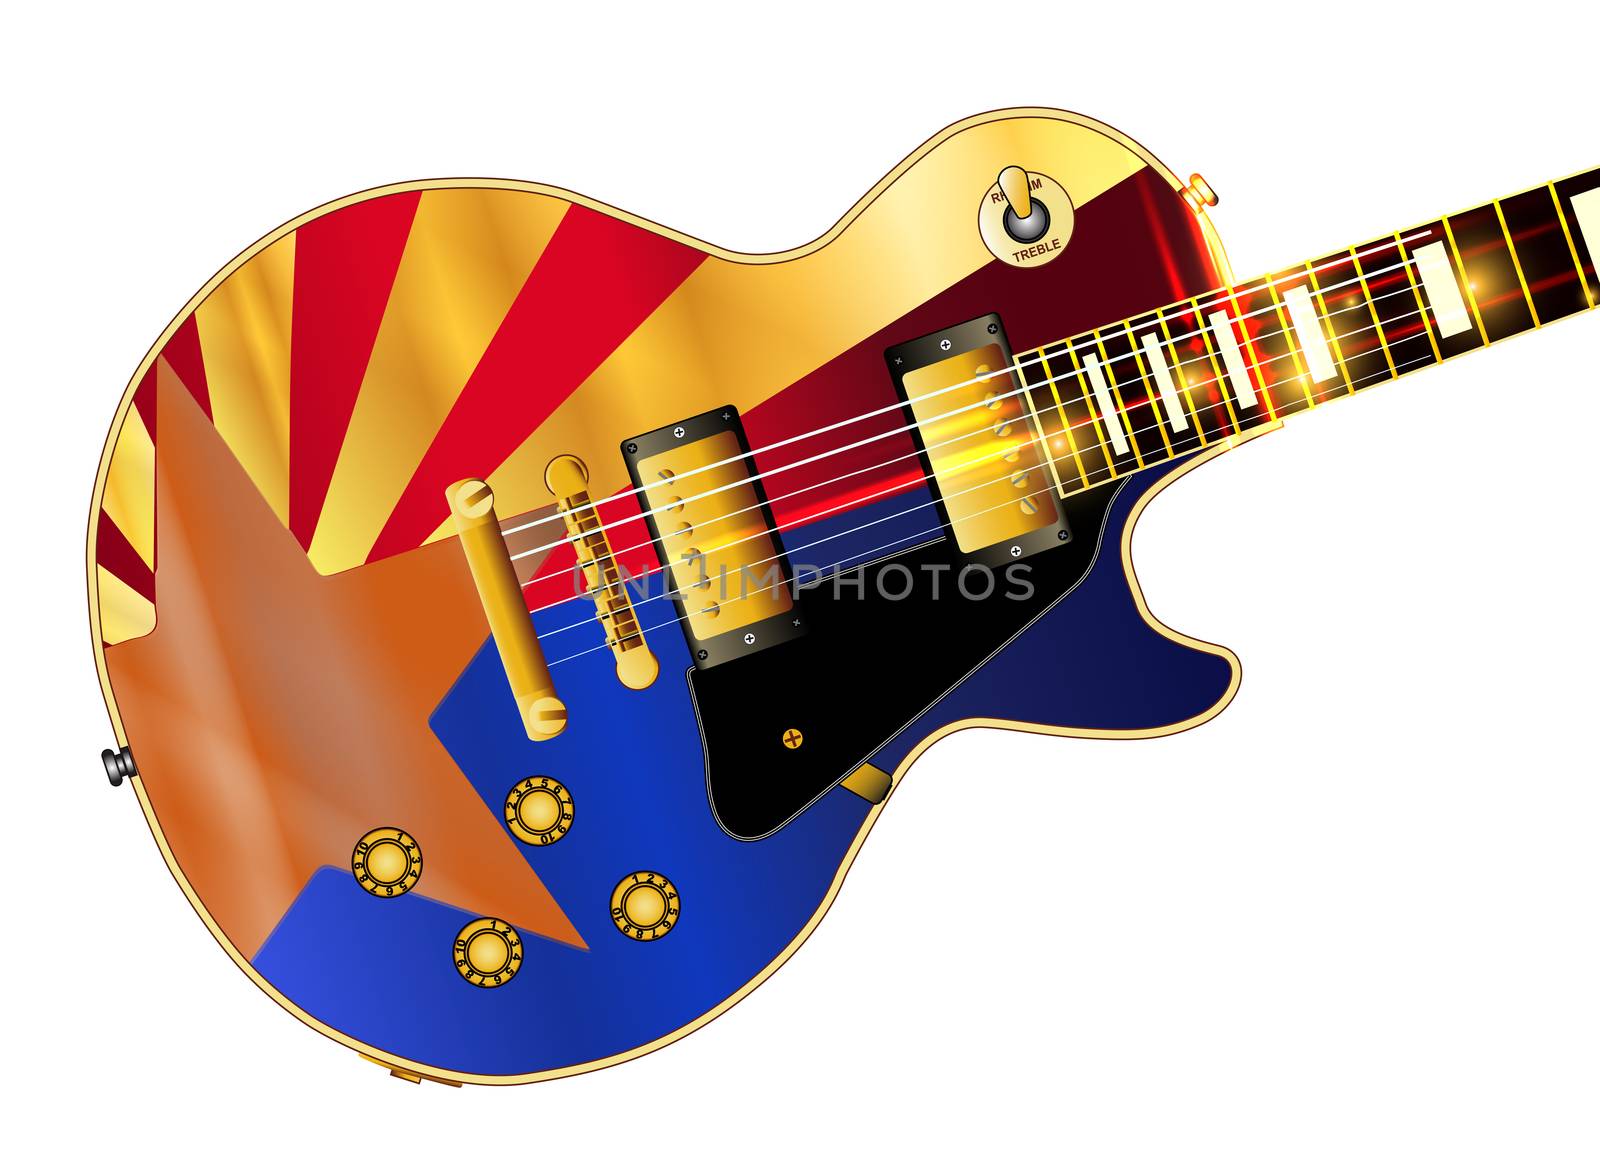 The definitive rock and roll guitar with the Arizona flag isolated over a white background.